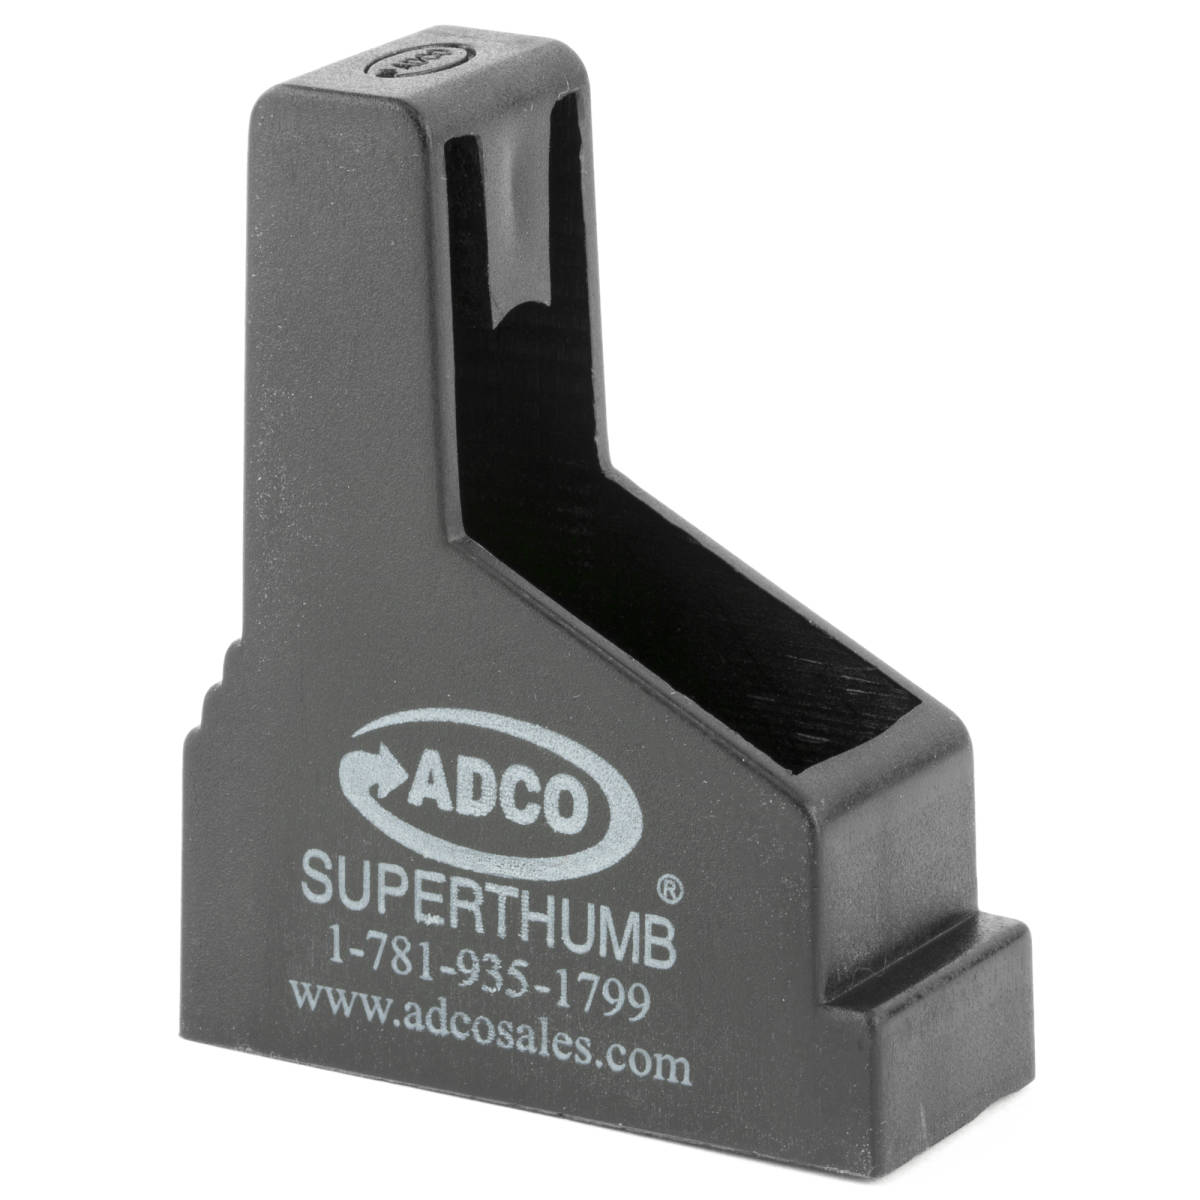 ADCO ST3 Super Thumb Mag Loader Single Stack Style, Black Polymer, For...-img-1